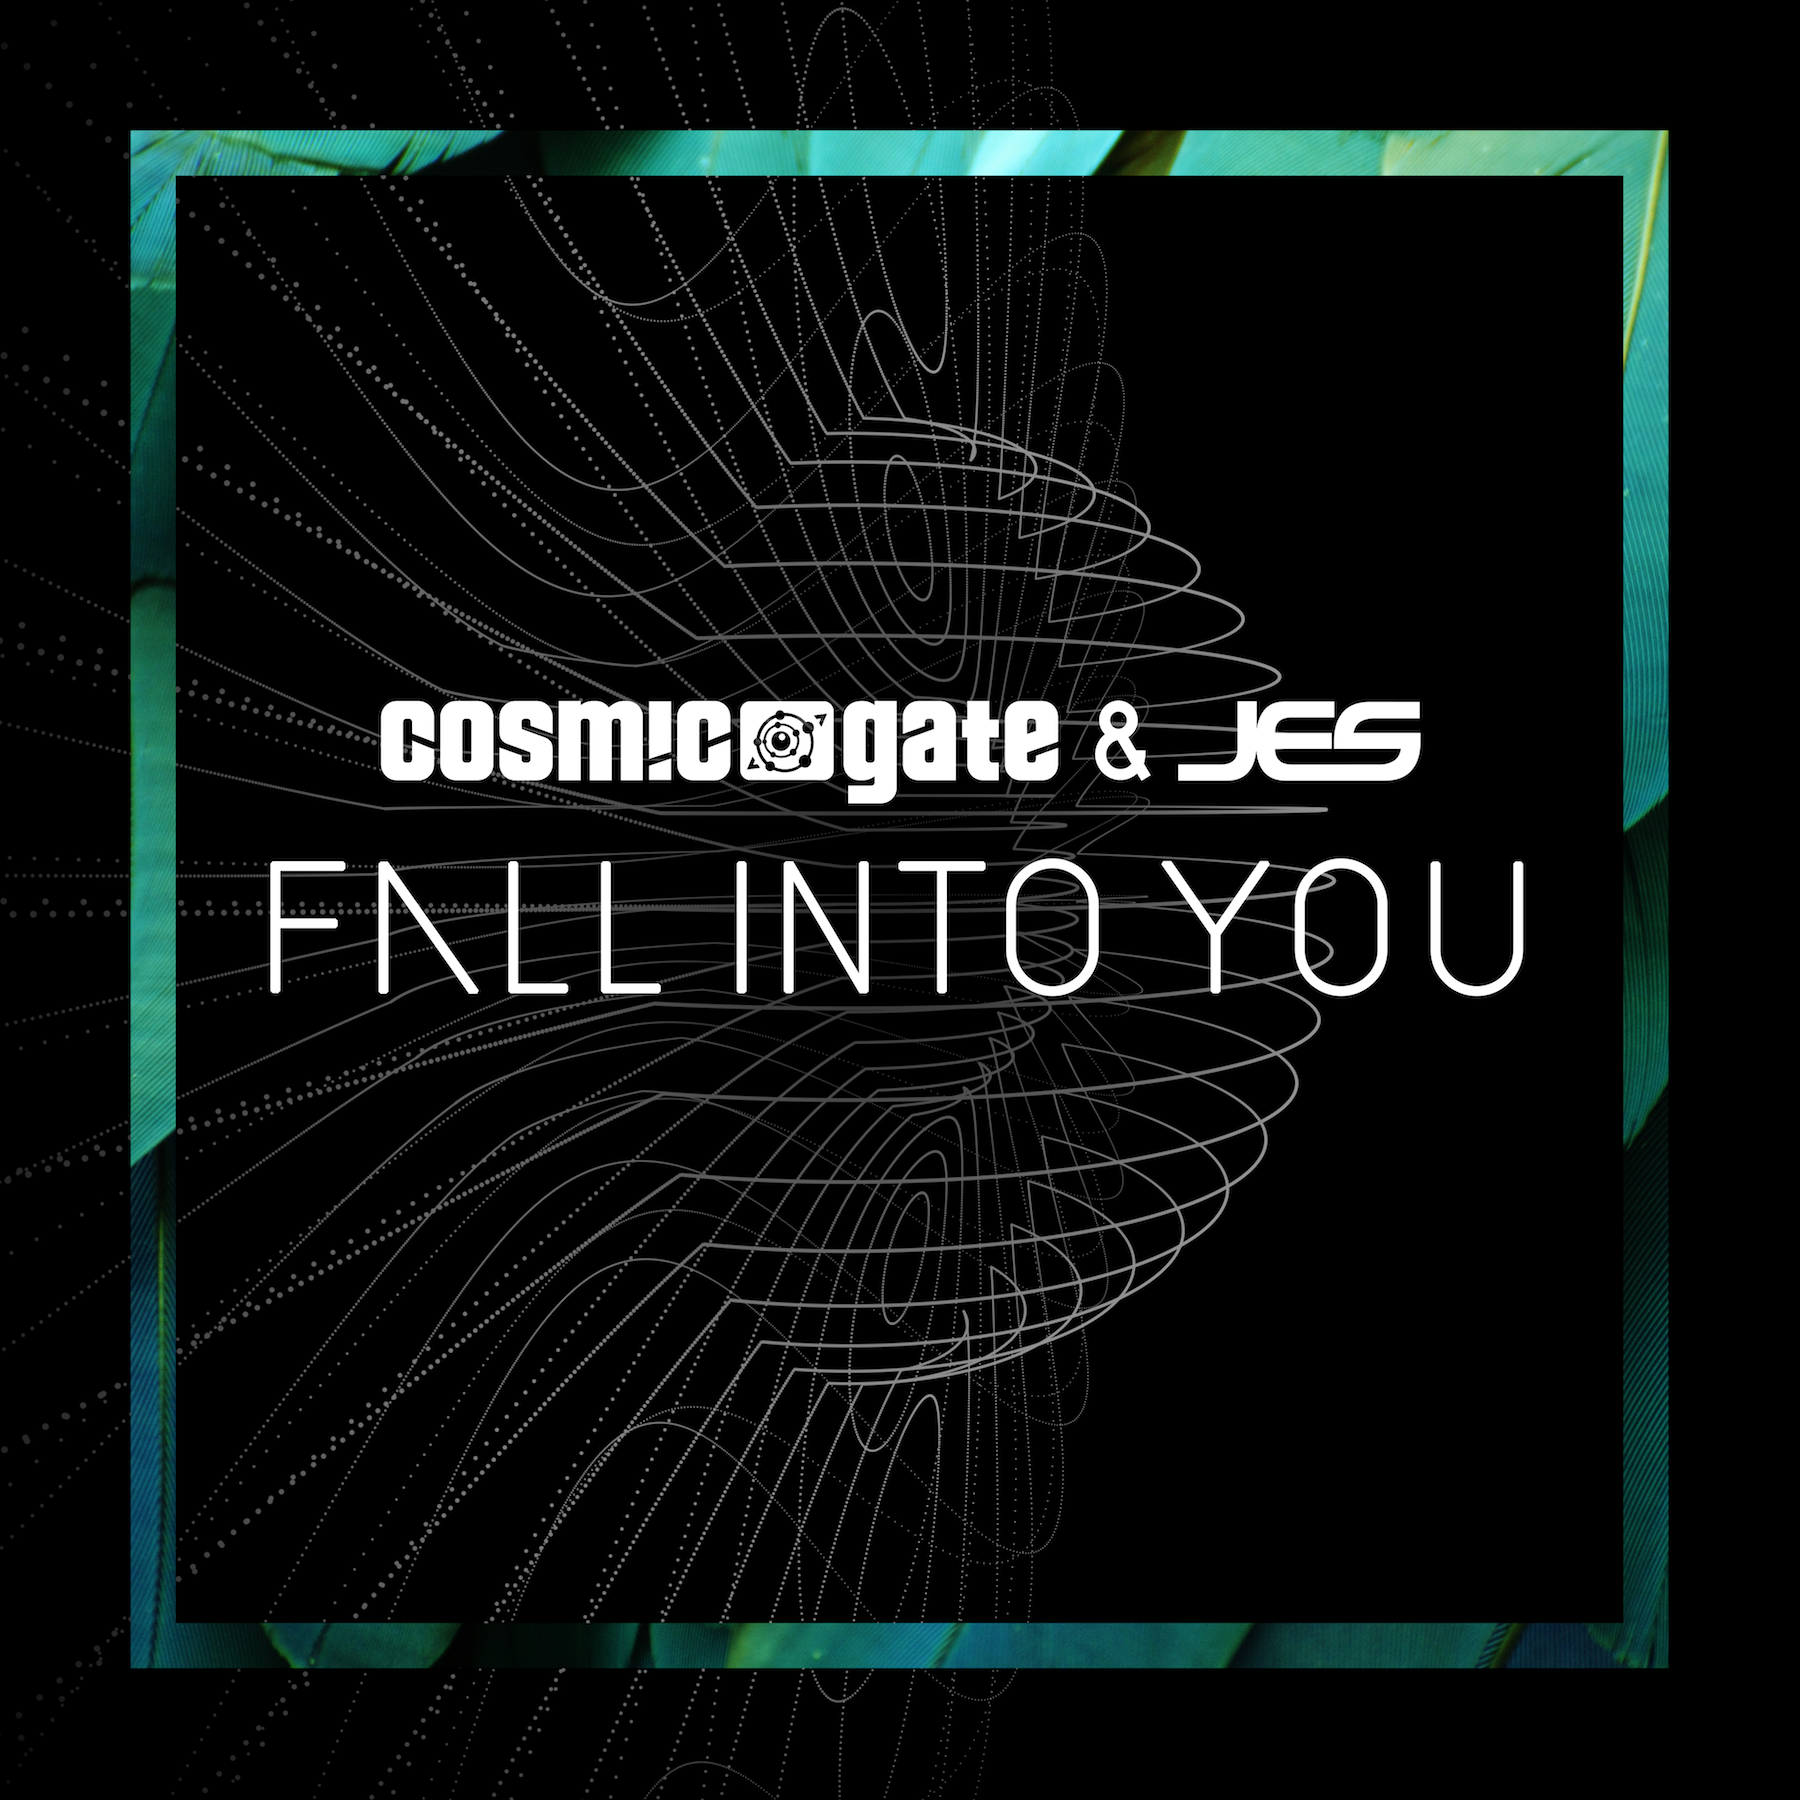 Cosmic Gate & JES "Fall Into You"